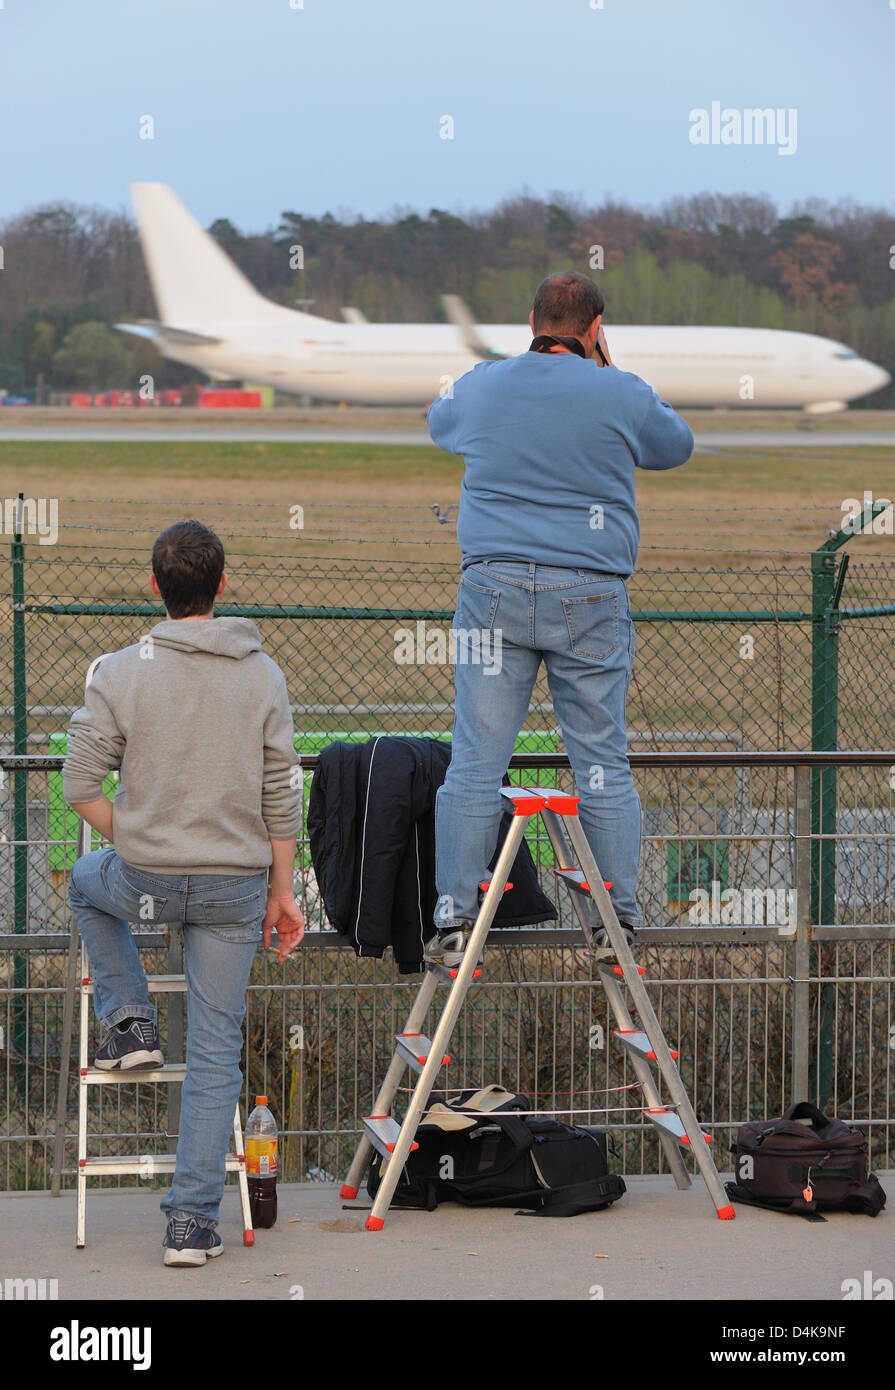 Two so called ?planespotter? follow their hobby at the western runway of Frankfurt Main?s ?Rain-Main? airport, Germany, 6 April 2009.  Planespotter stick to photographing airplanes and airports only. Photo: Uwe Anspach Stock Photo